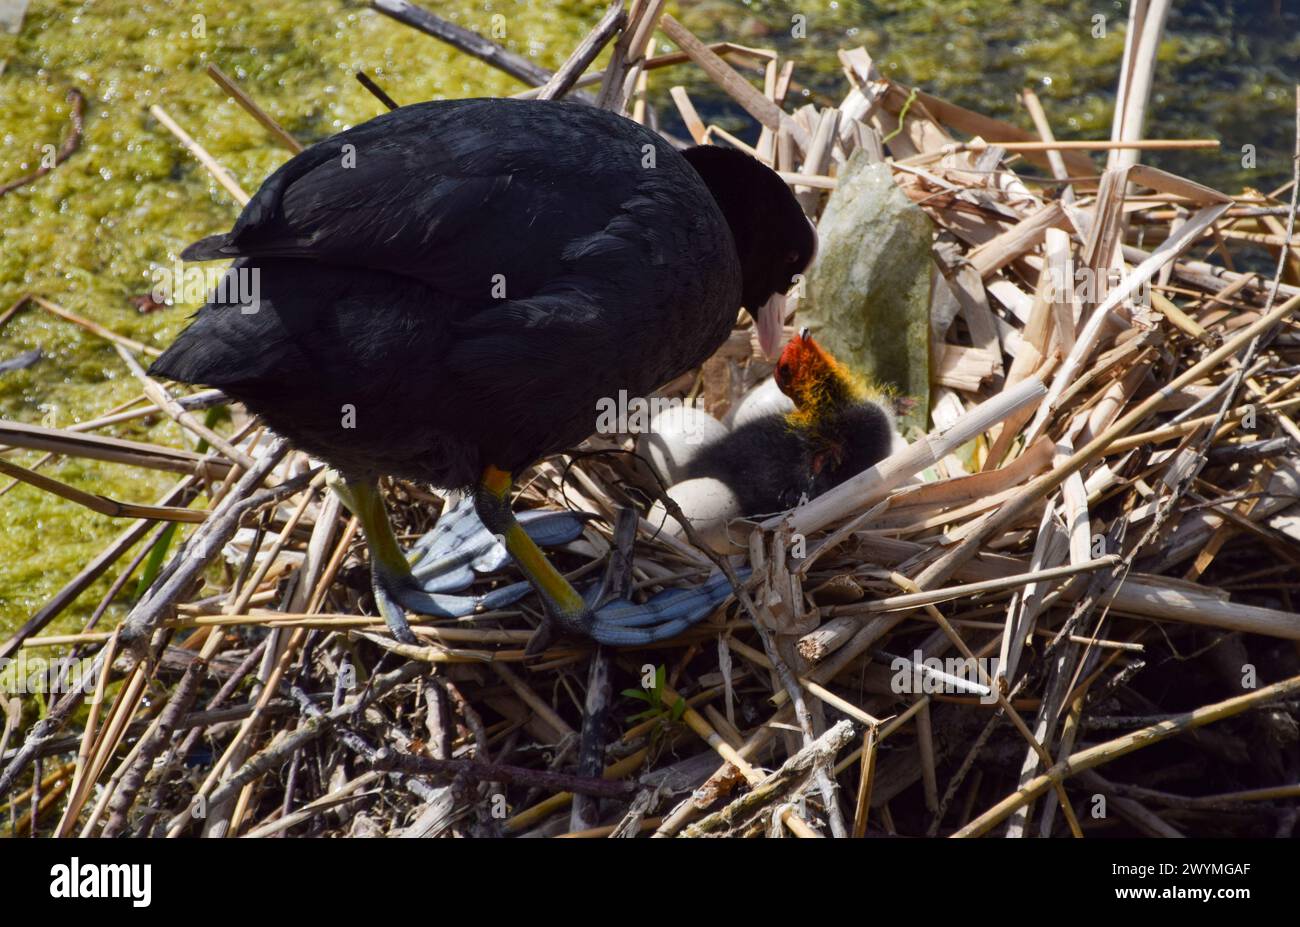 London, UK. 28th May 2022. Eurasian coot (Fulica atra) mother feeds her newborn chicks in a nest. Credit: Vuk Valcic / Alamy Stock Photo